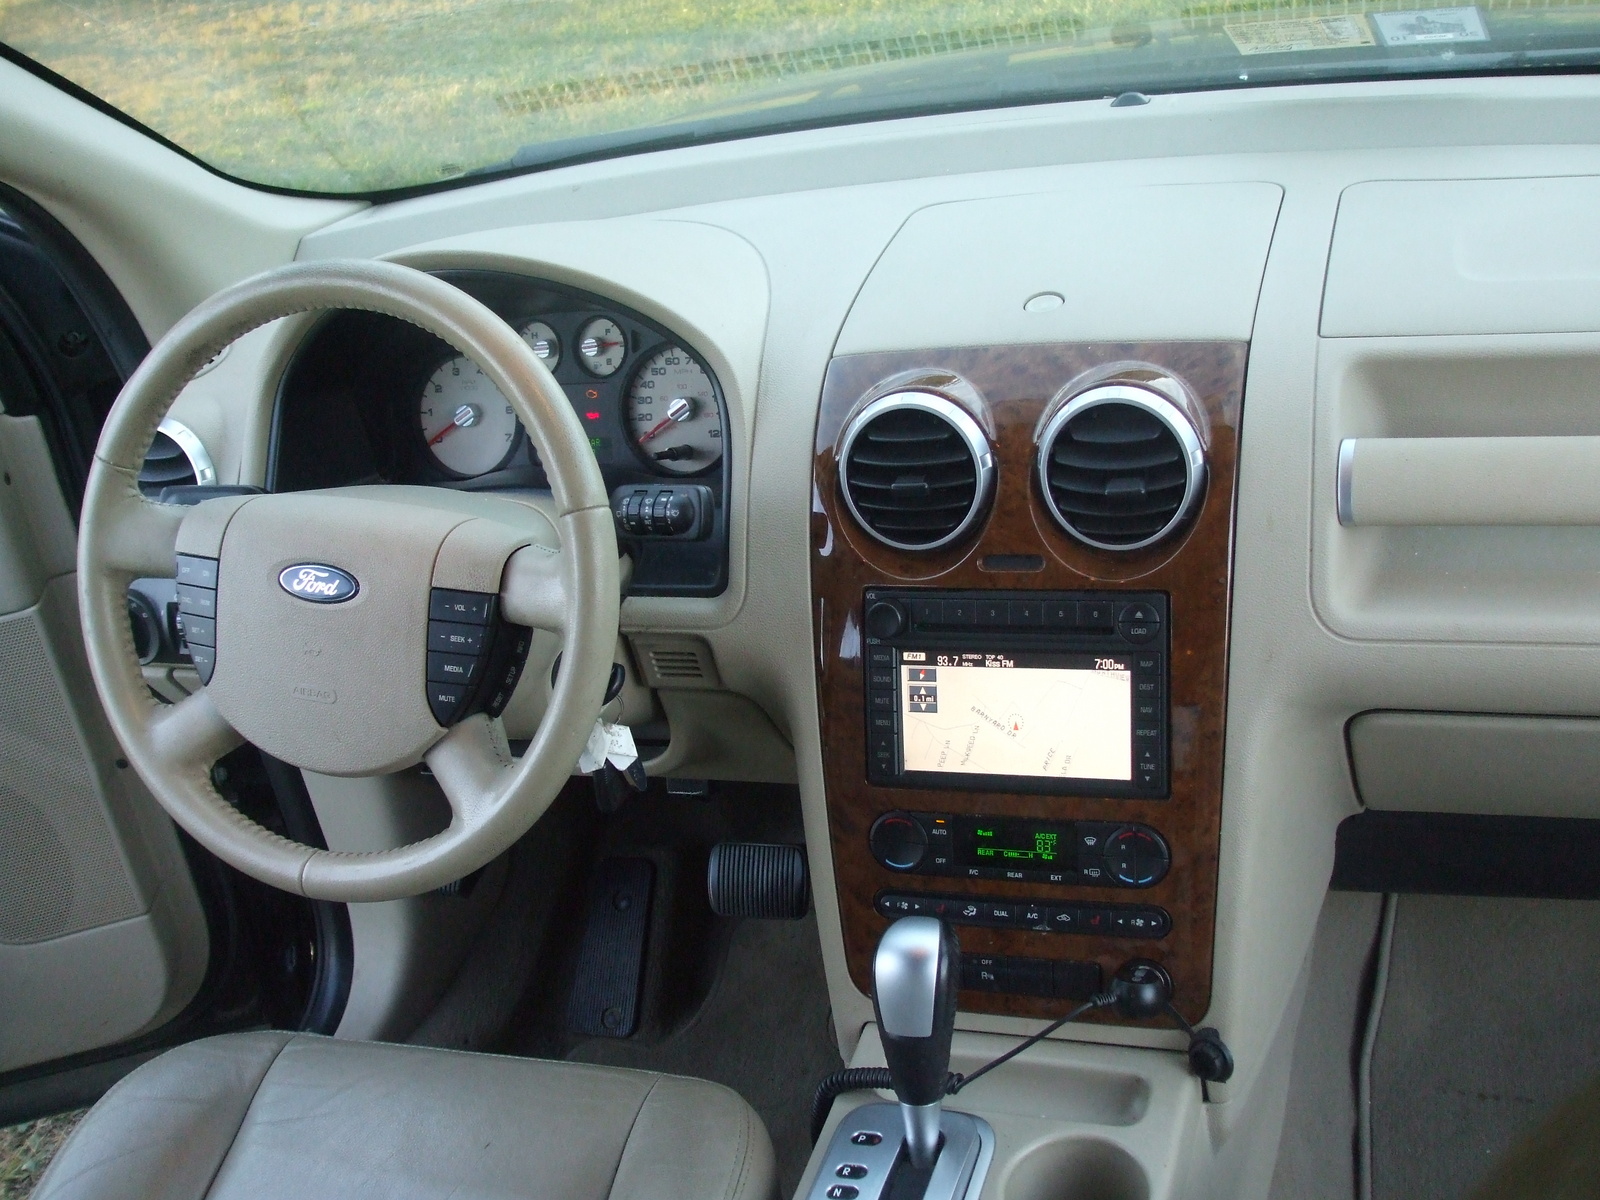 Ford Freestyle Limited